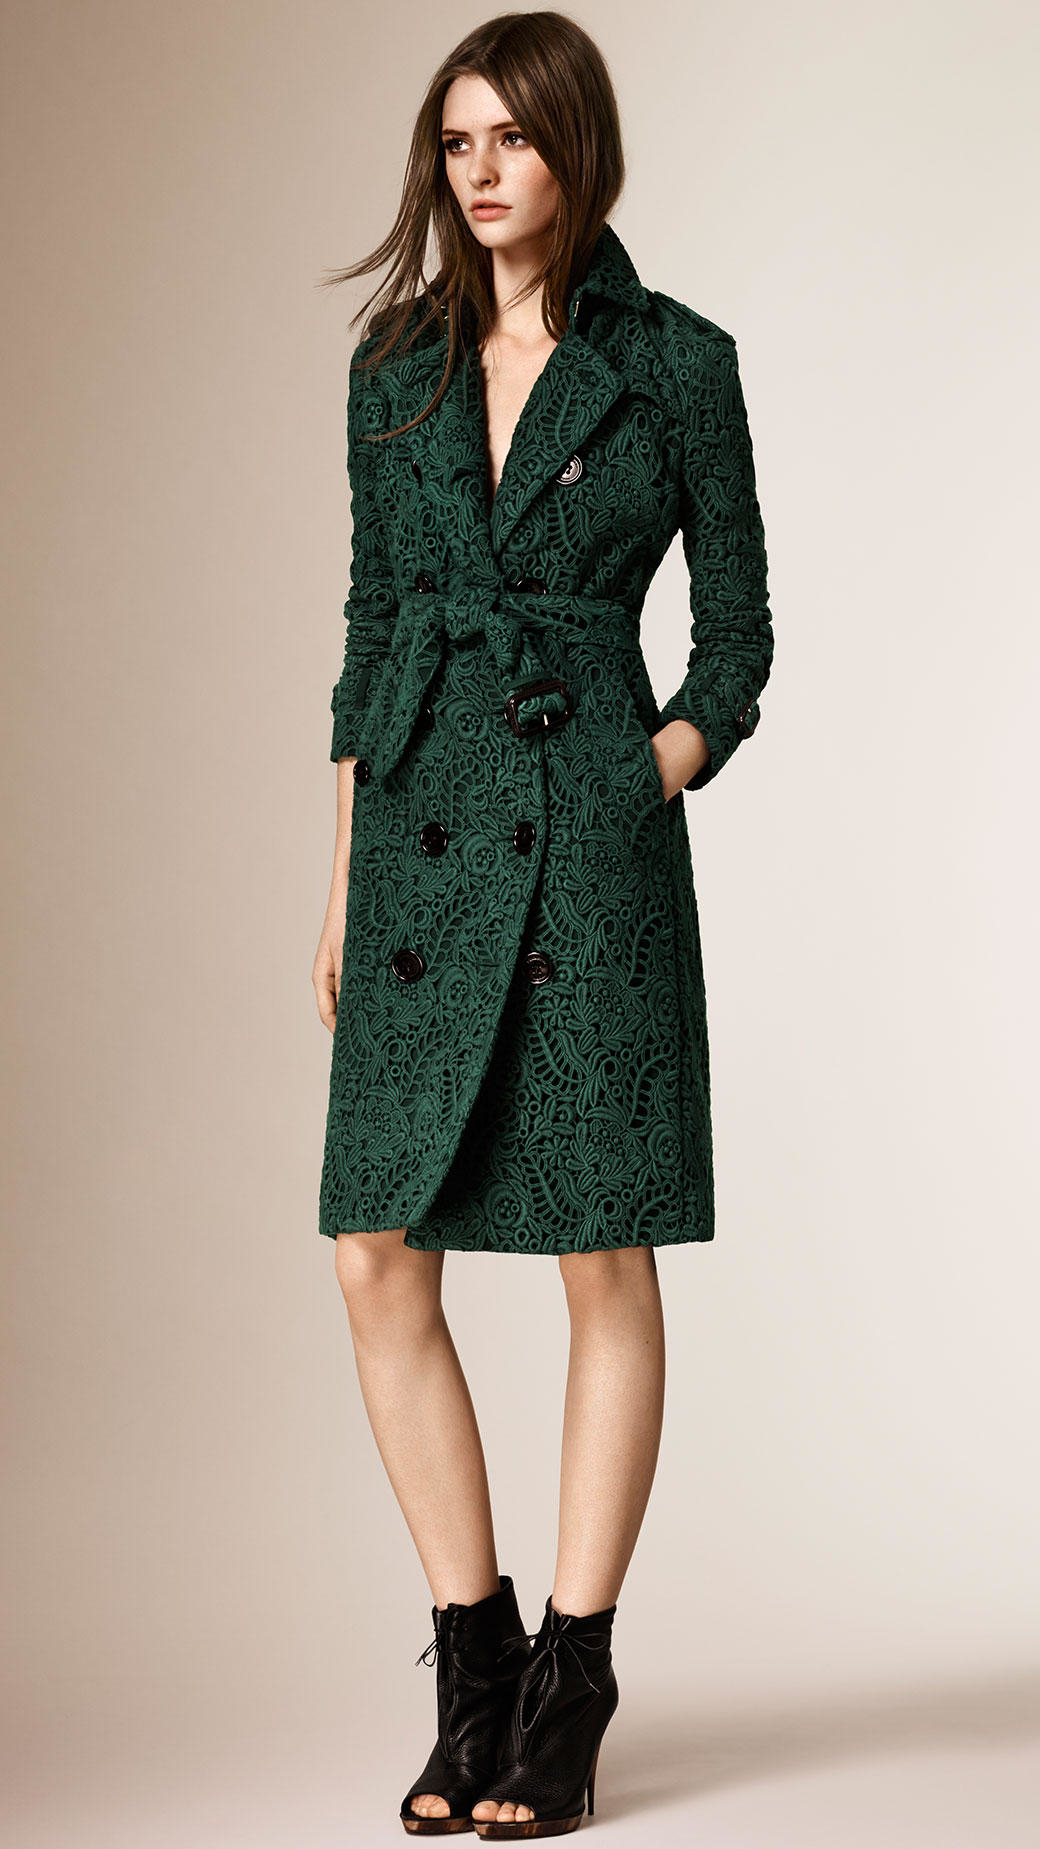 Lyst - Burberry Macramé Lace Trench Coat in Green